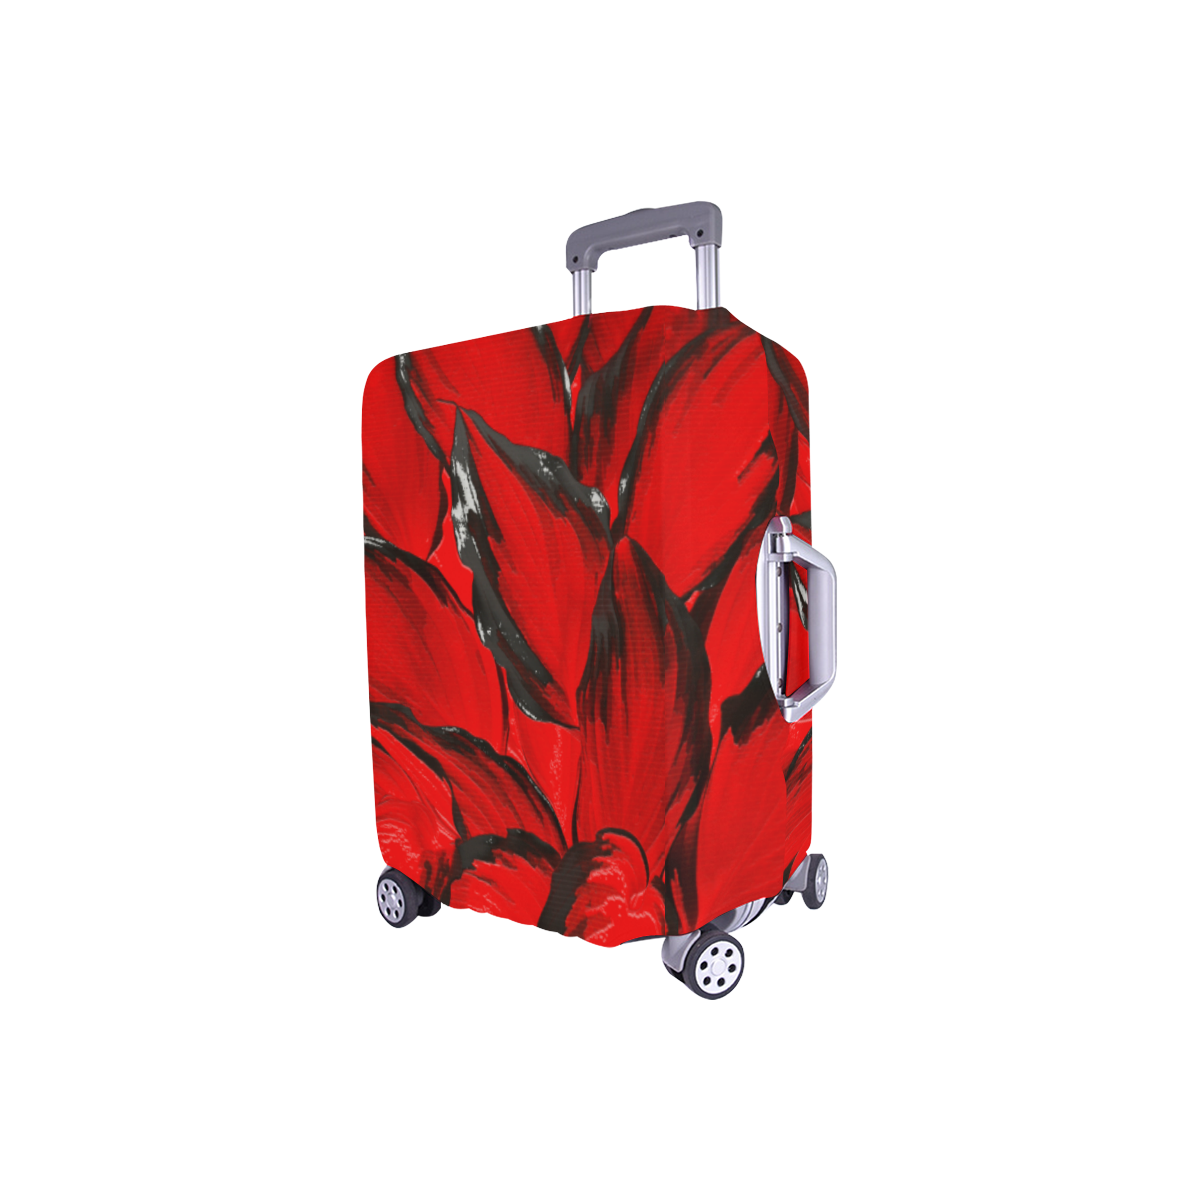 leafs_abstract TRY2 06 Luggage Cover/Small 18"-21"